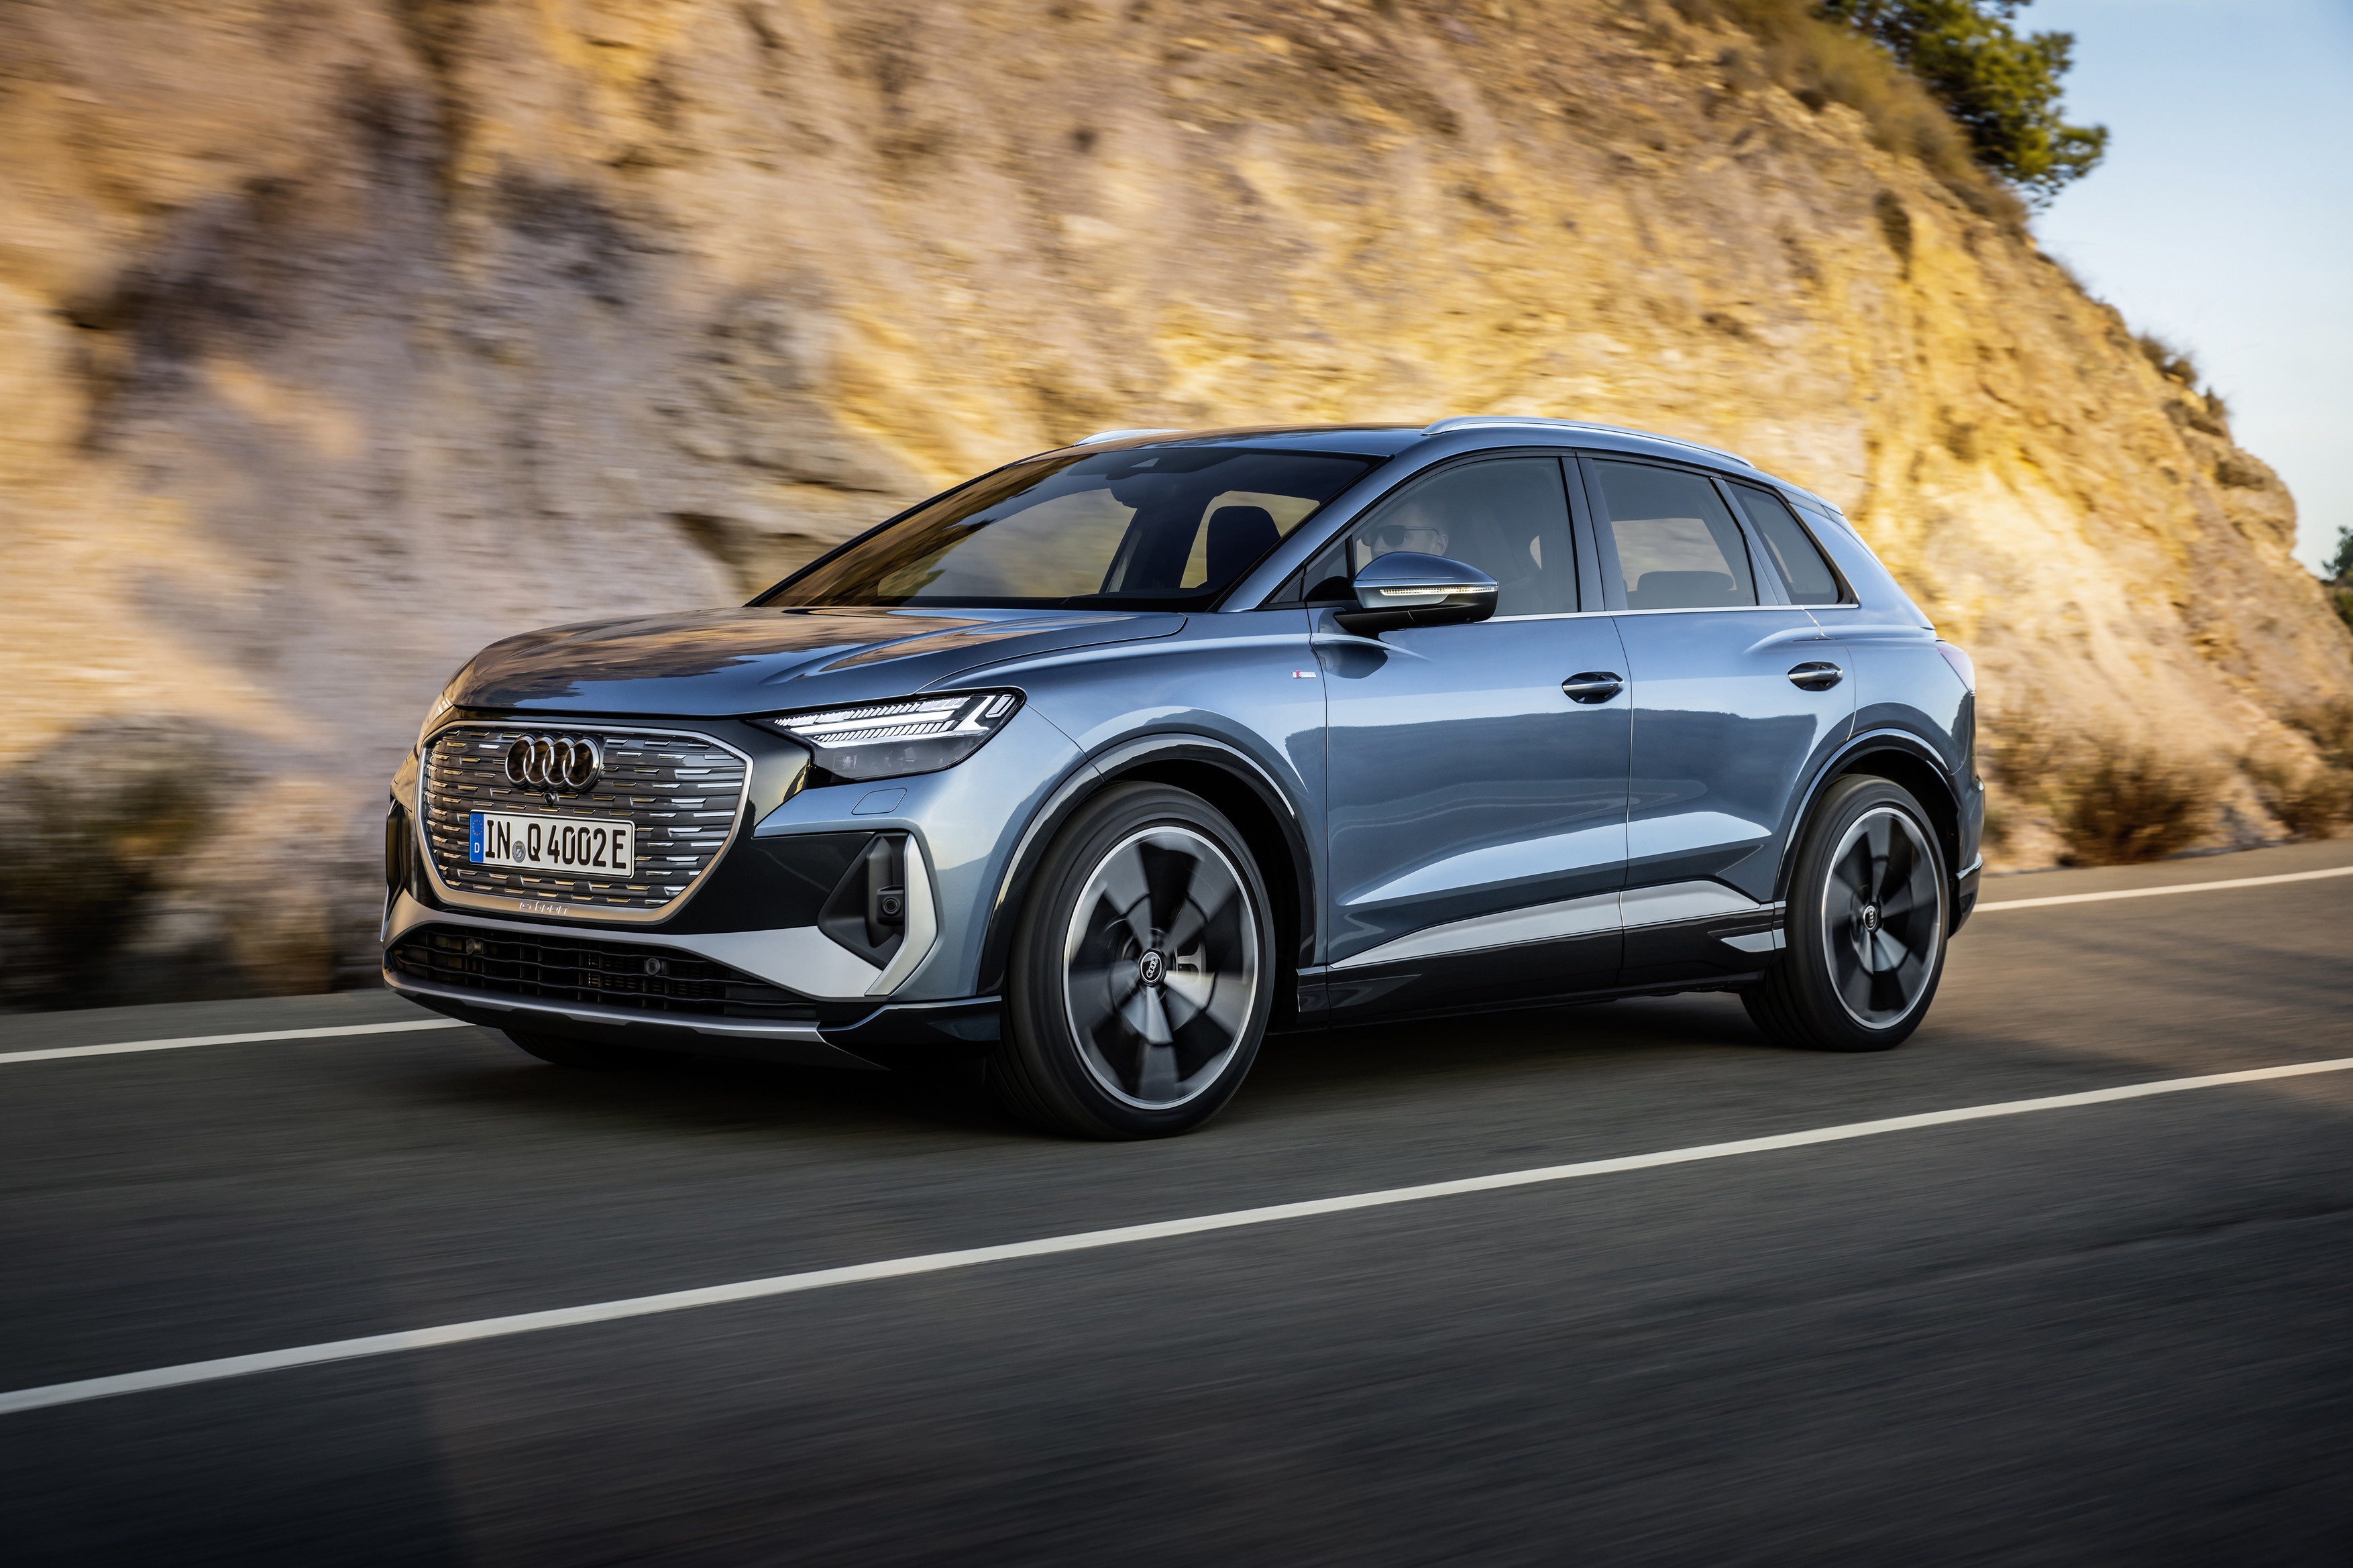 Audi unveils production version of e-tron Q4 electric SUV with over 300  miles of range